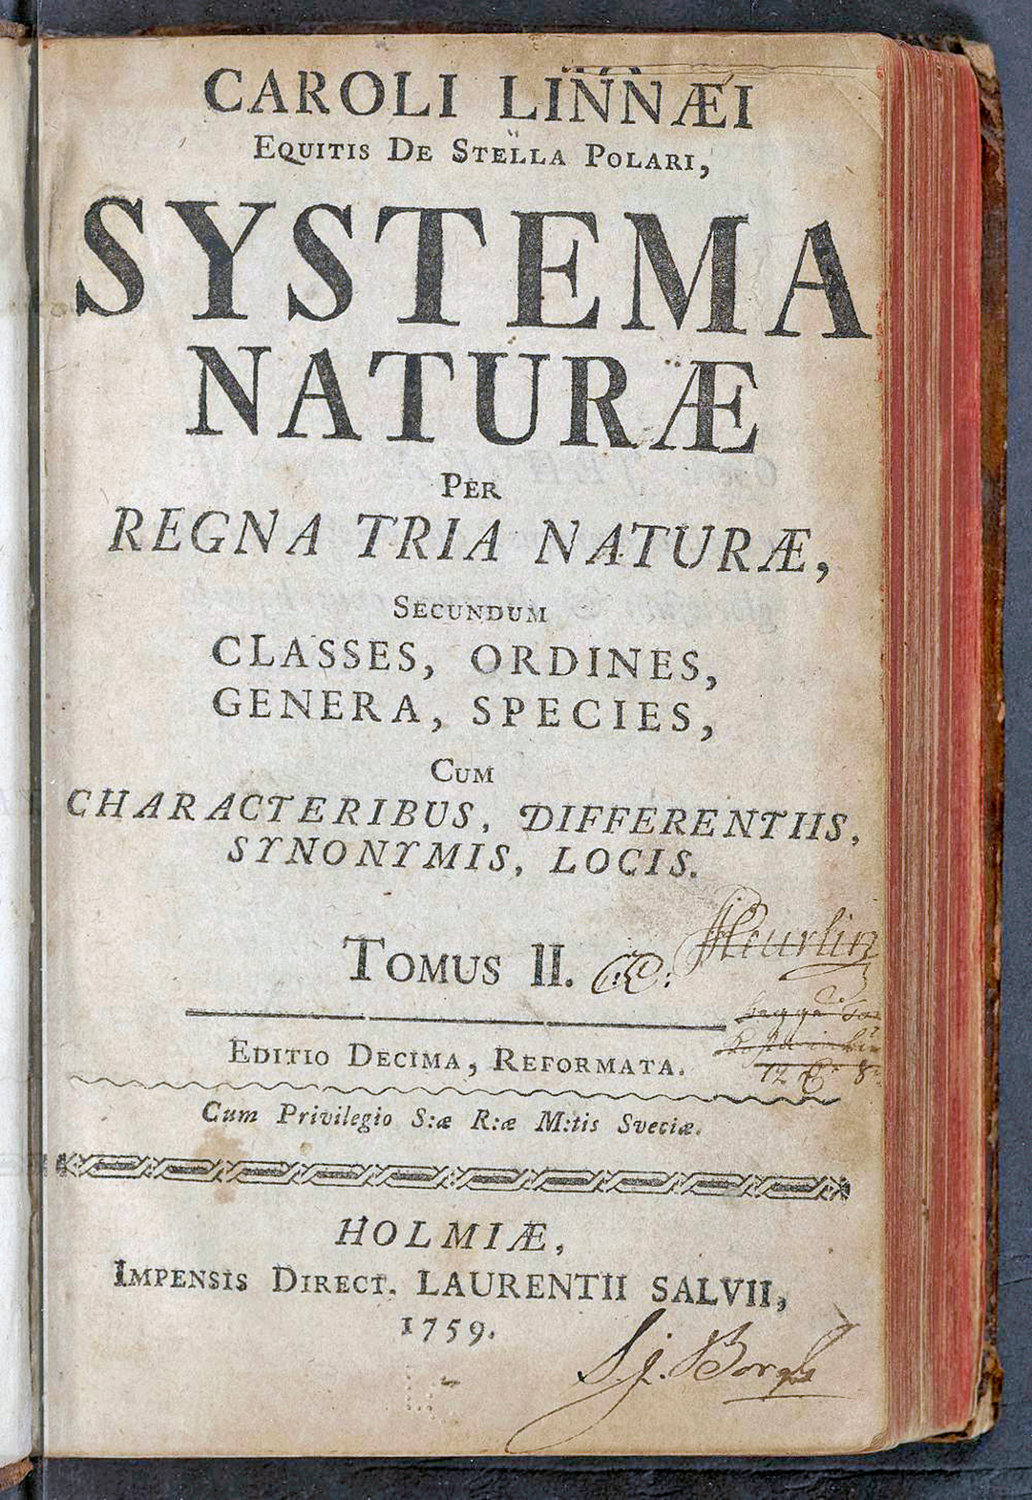 This image provided by the Library of Congress shows the title page of “Systema Naturae,” the groundbreaking 1735 book by Carolus Linnaeus, also known as Caroli Linnaei, that introduced botanical nomenclature and classified all living things.